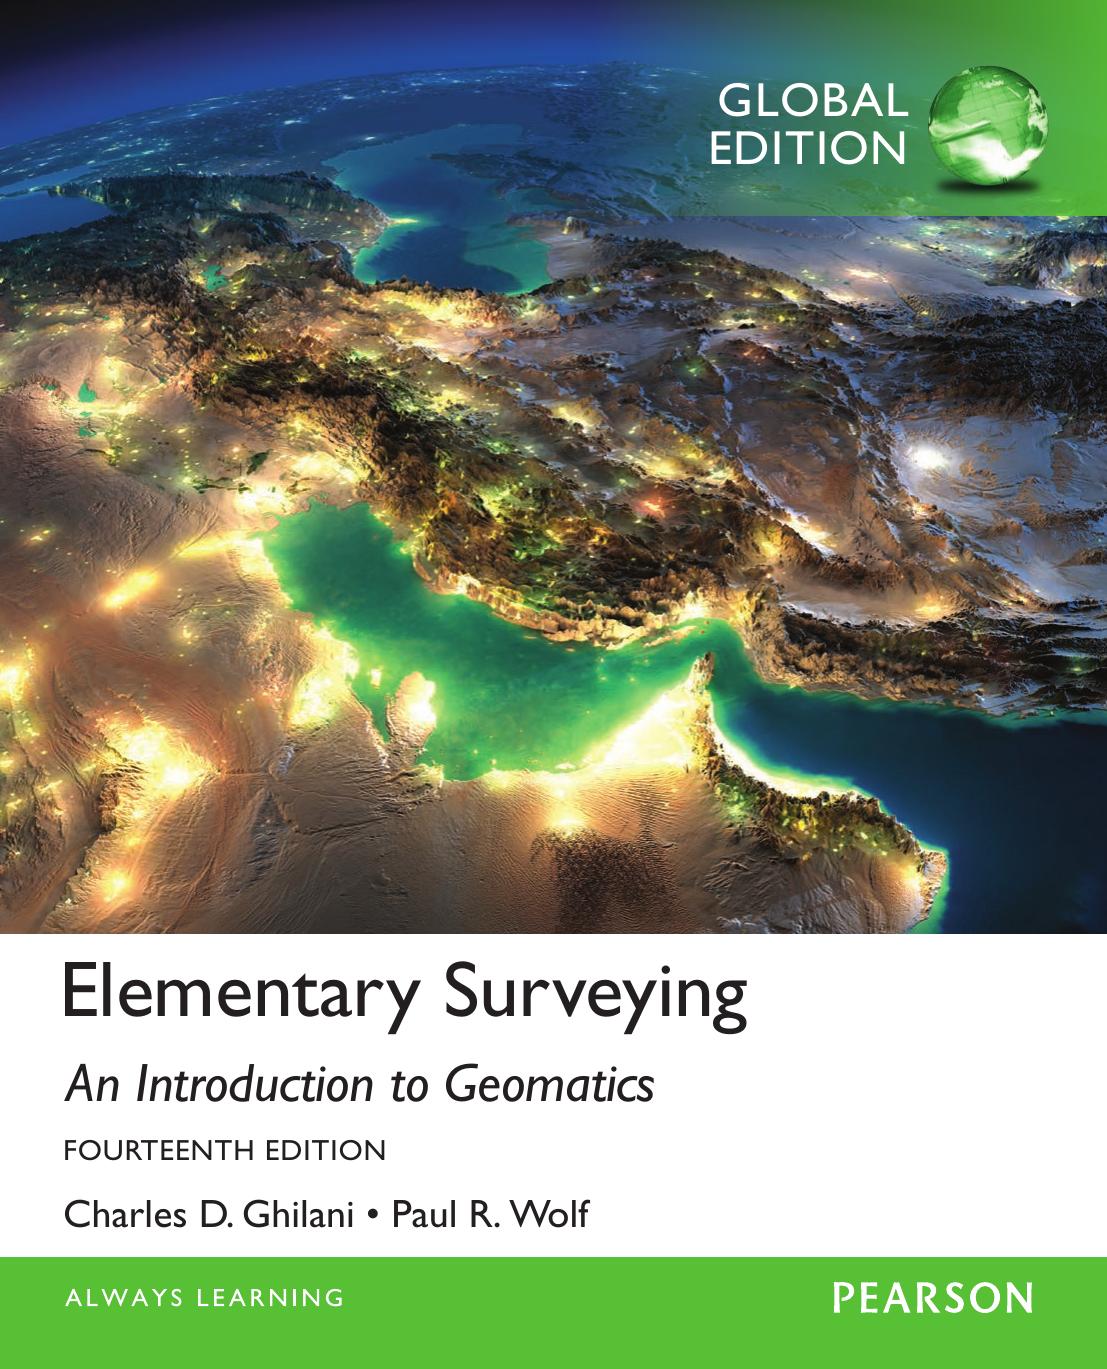 Elementary surveying  an introduction to geomatics-Pearson (2014 2015)